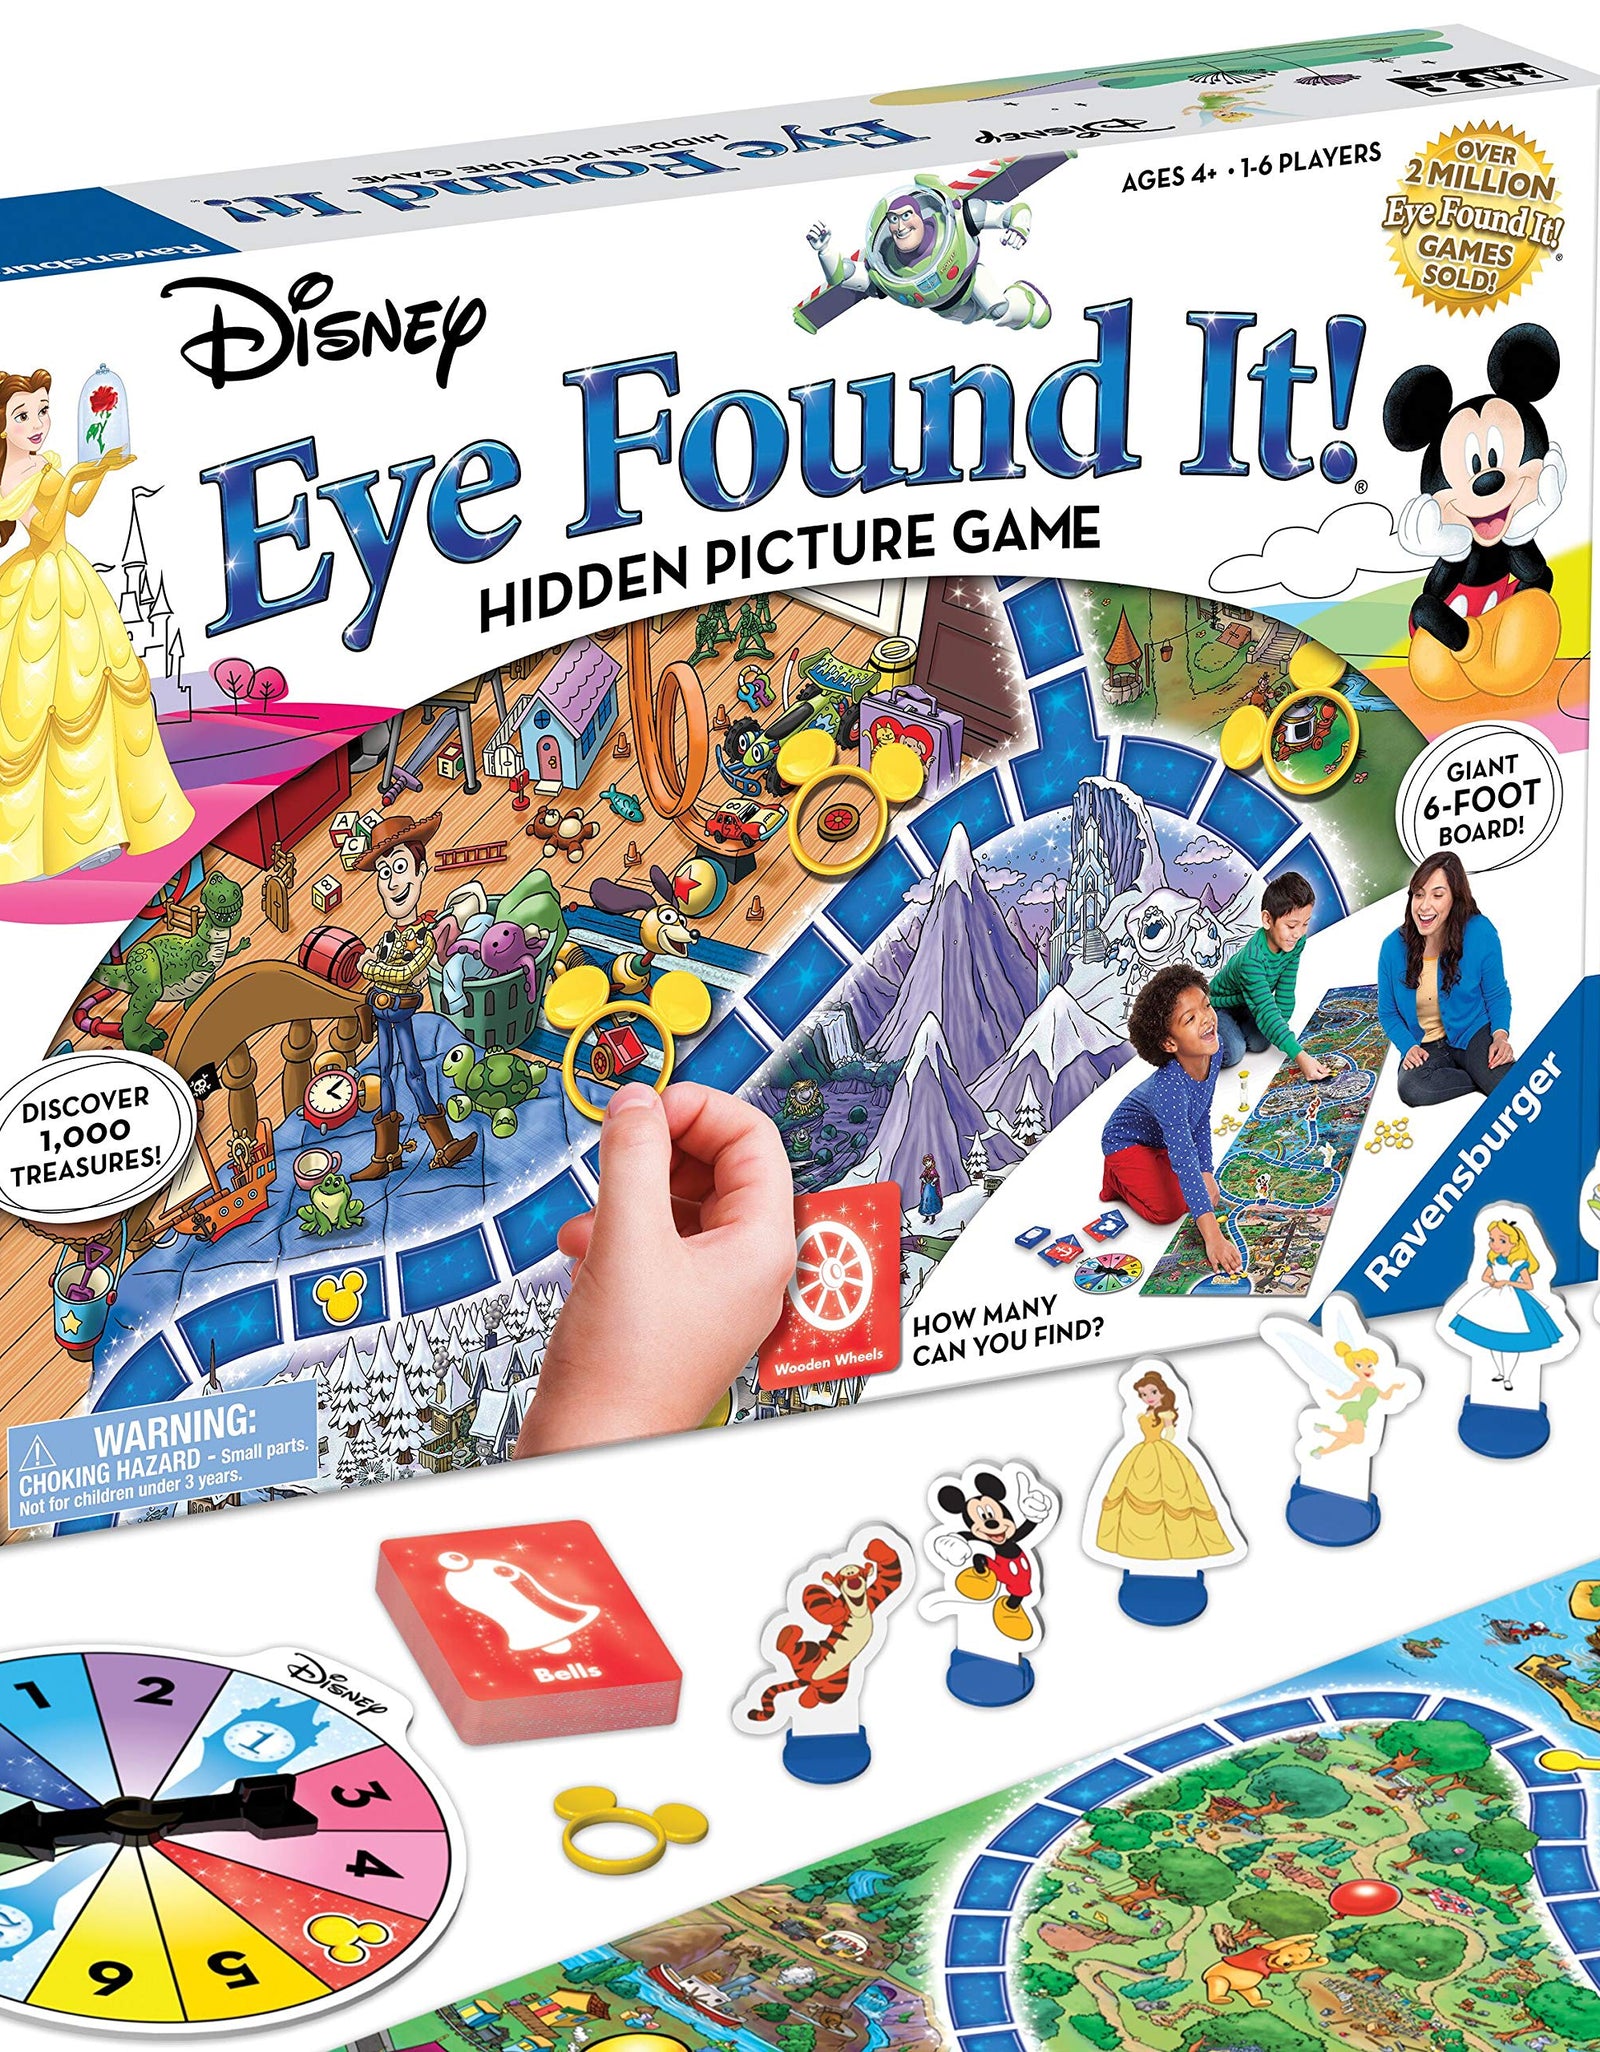 Ravensburger World of Disney Eye Found It Board Game for Boys and Girls Ages 4 and Up - A Fun Family Game You'll Want to Play Again and Again